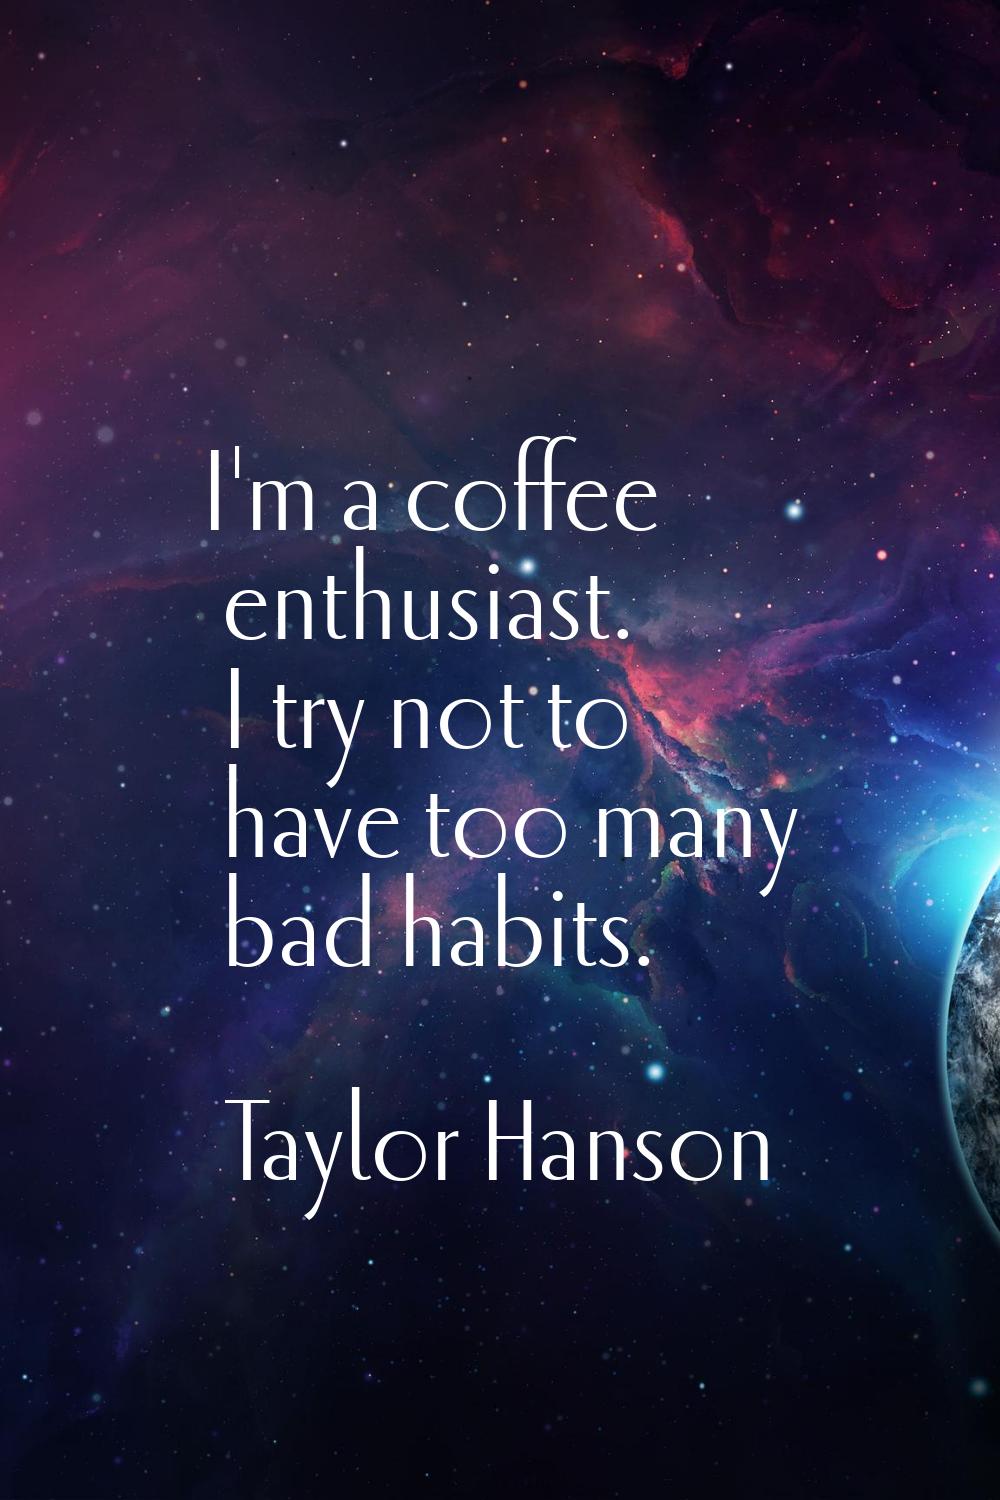 I'm a coffee enthusiast. I try not to have too many bad habits.